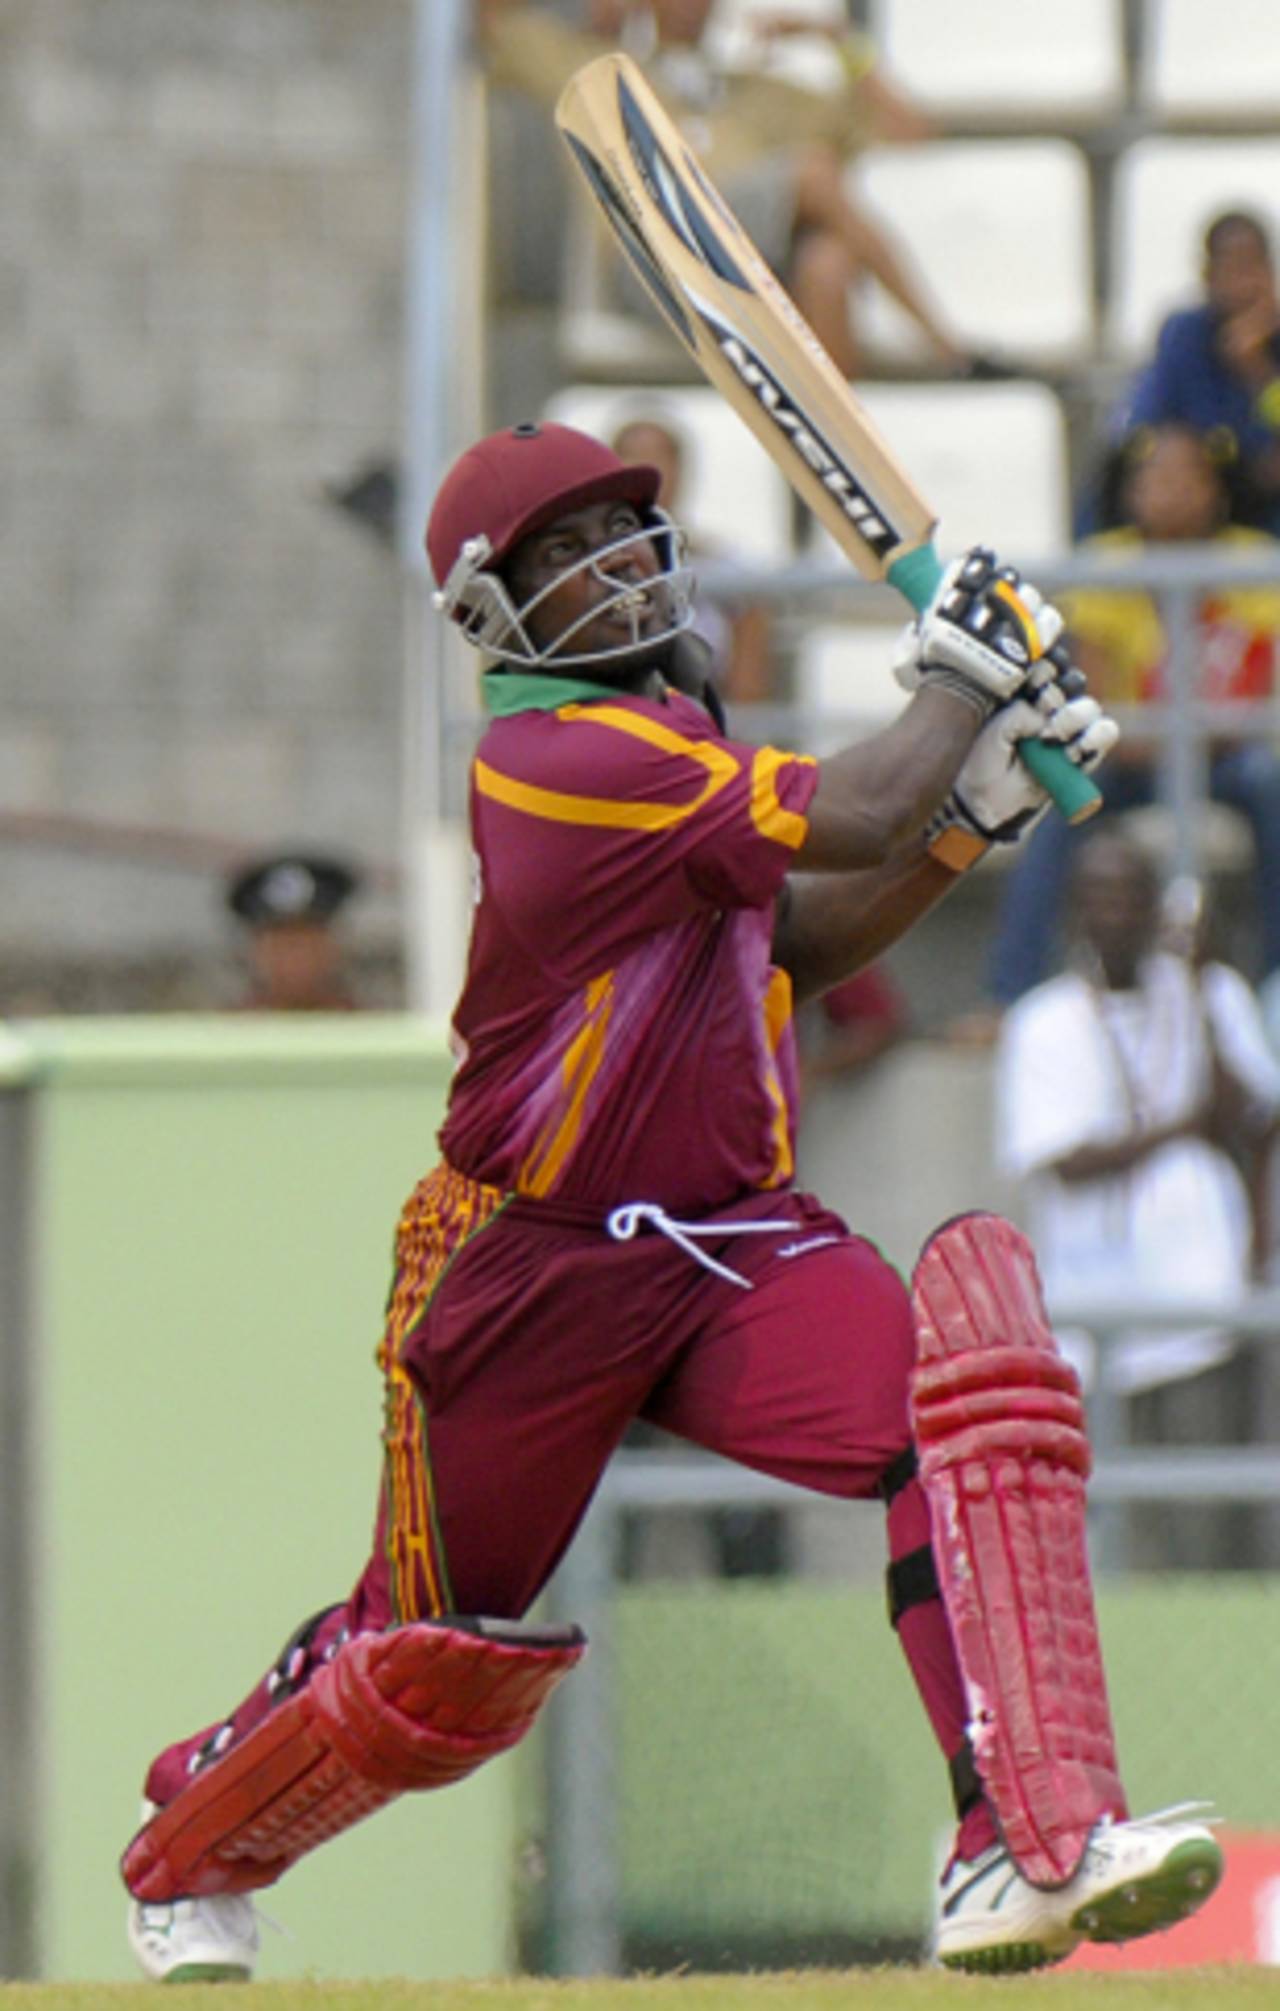 Travis Dowlin switches gears, West Indies v Bangladesh, 2nd ODI, Dominica, July 28, 2009